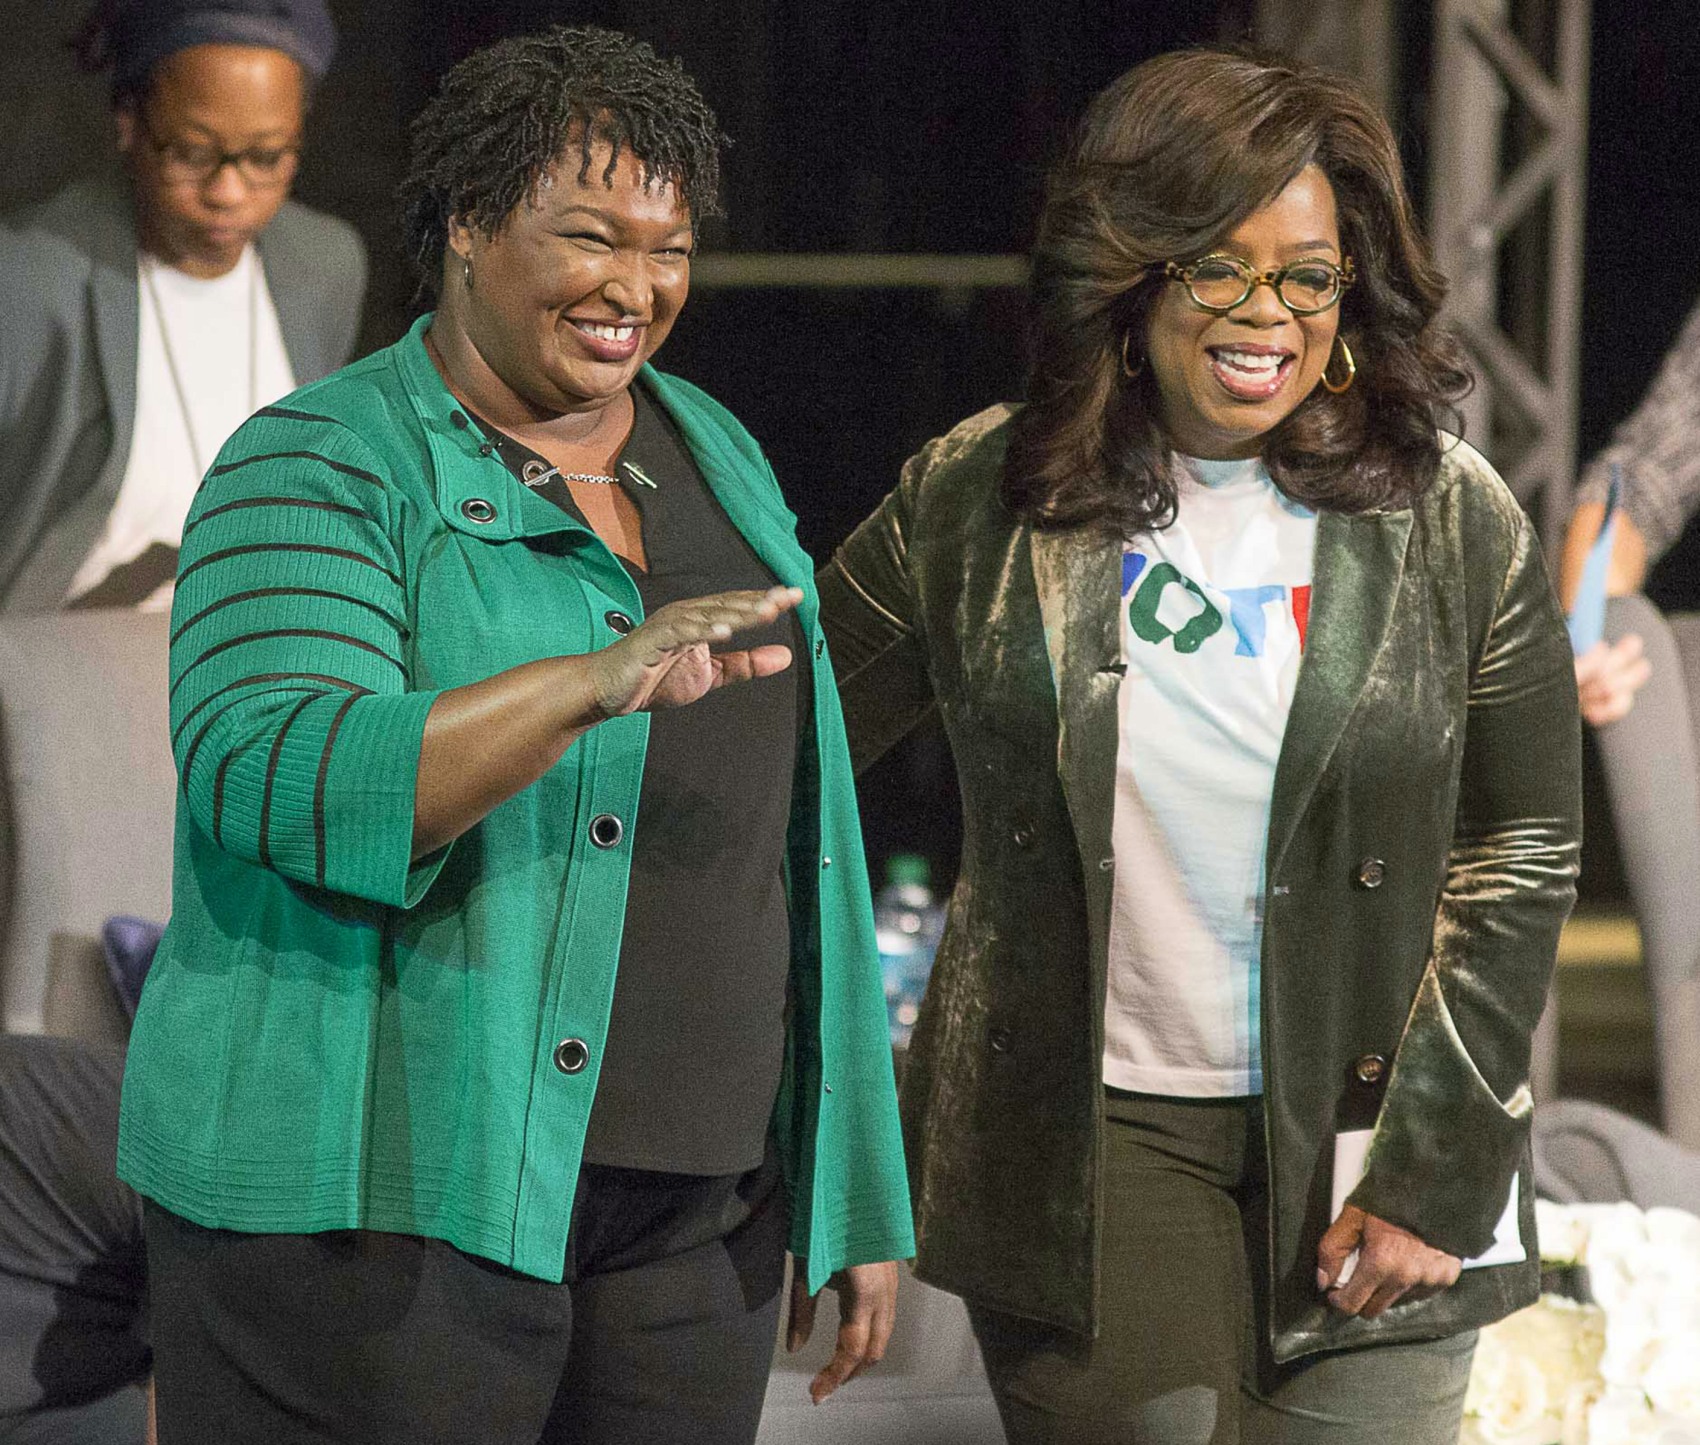 Oprah Winfrey campaigns for Stacey Abrams in Georgia